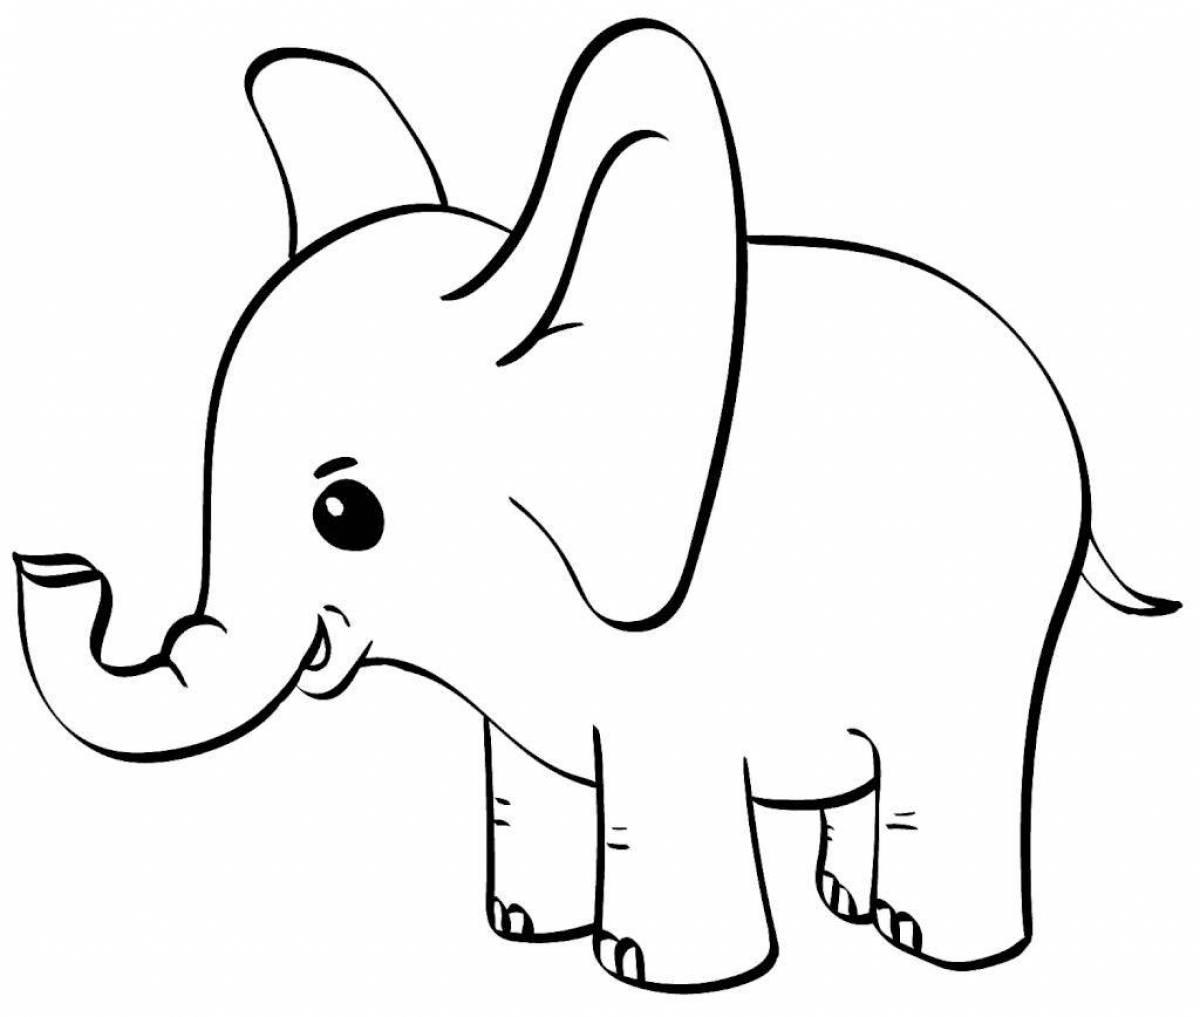 Cute elephant coloring for kids